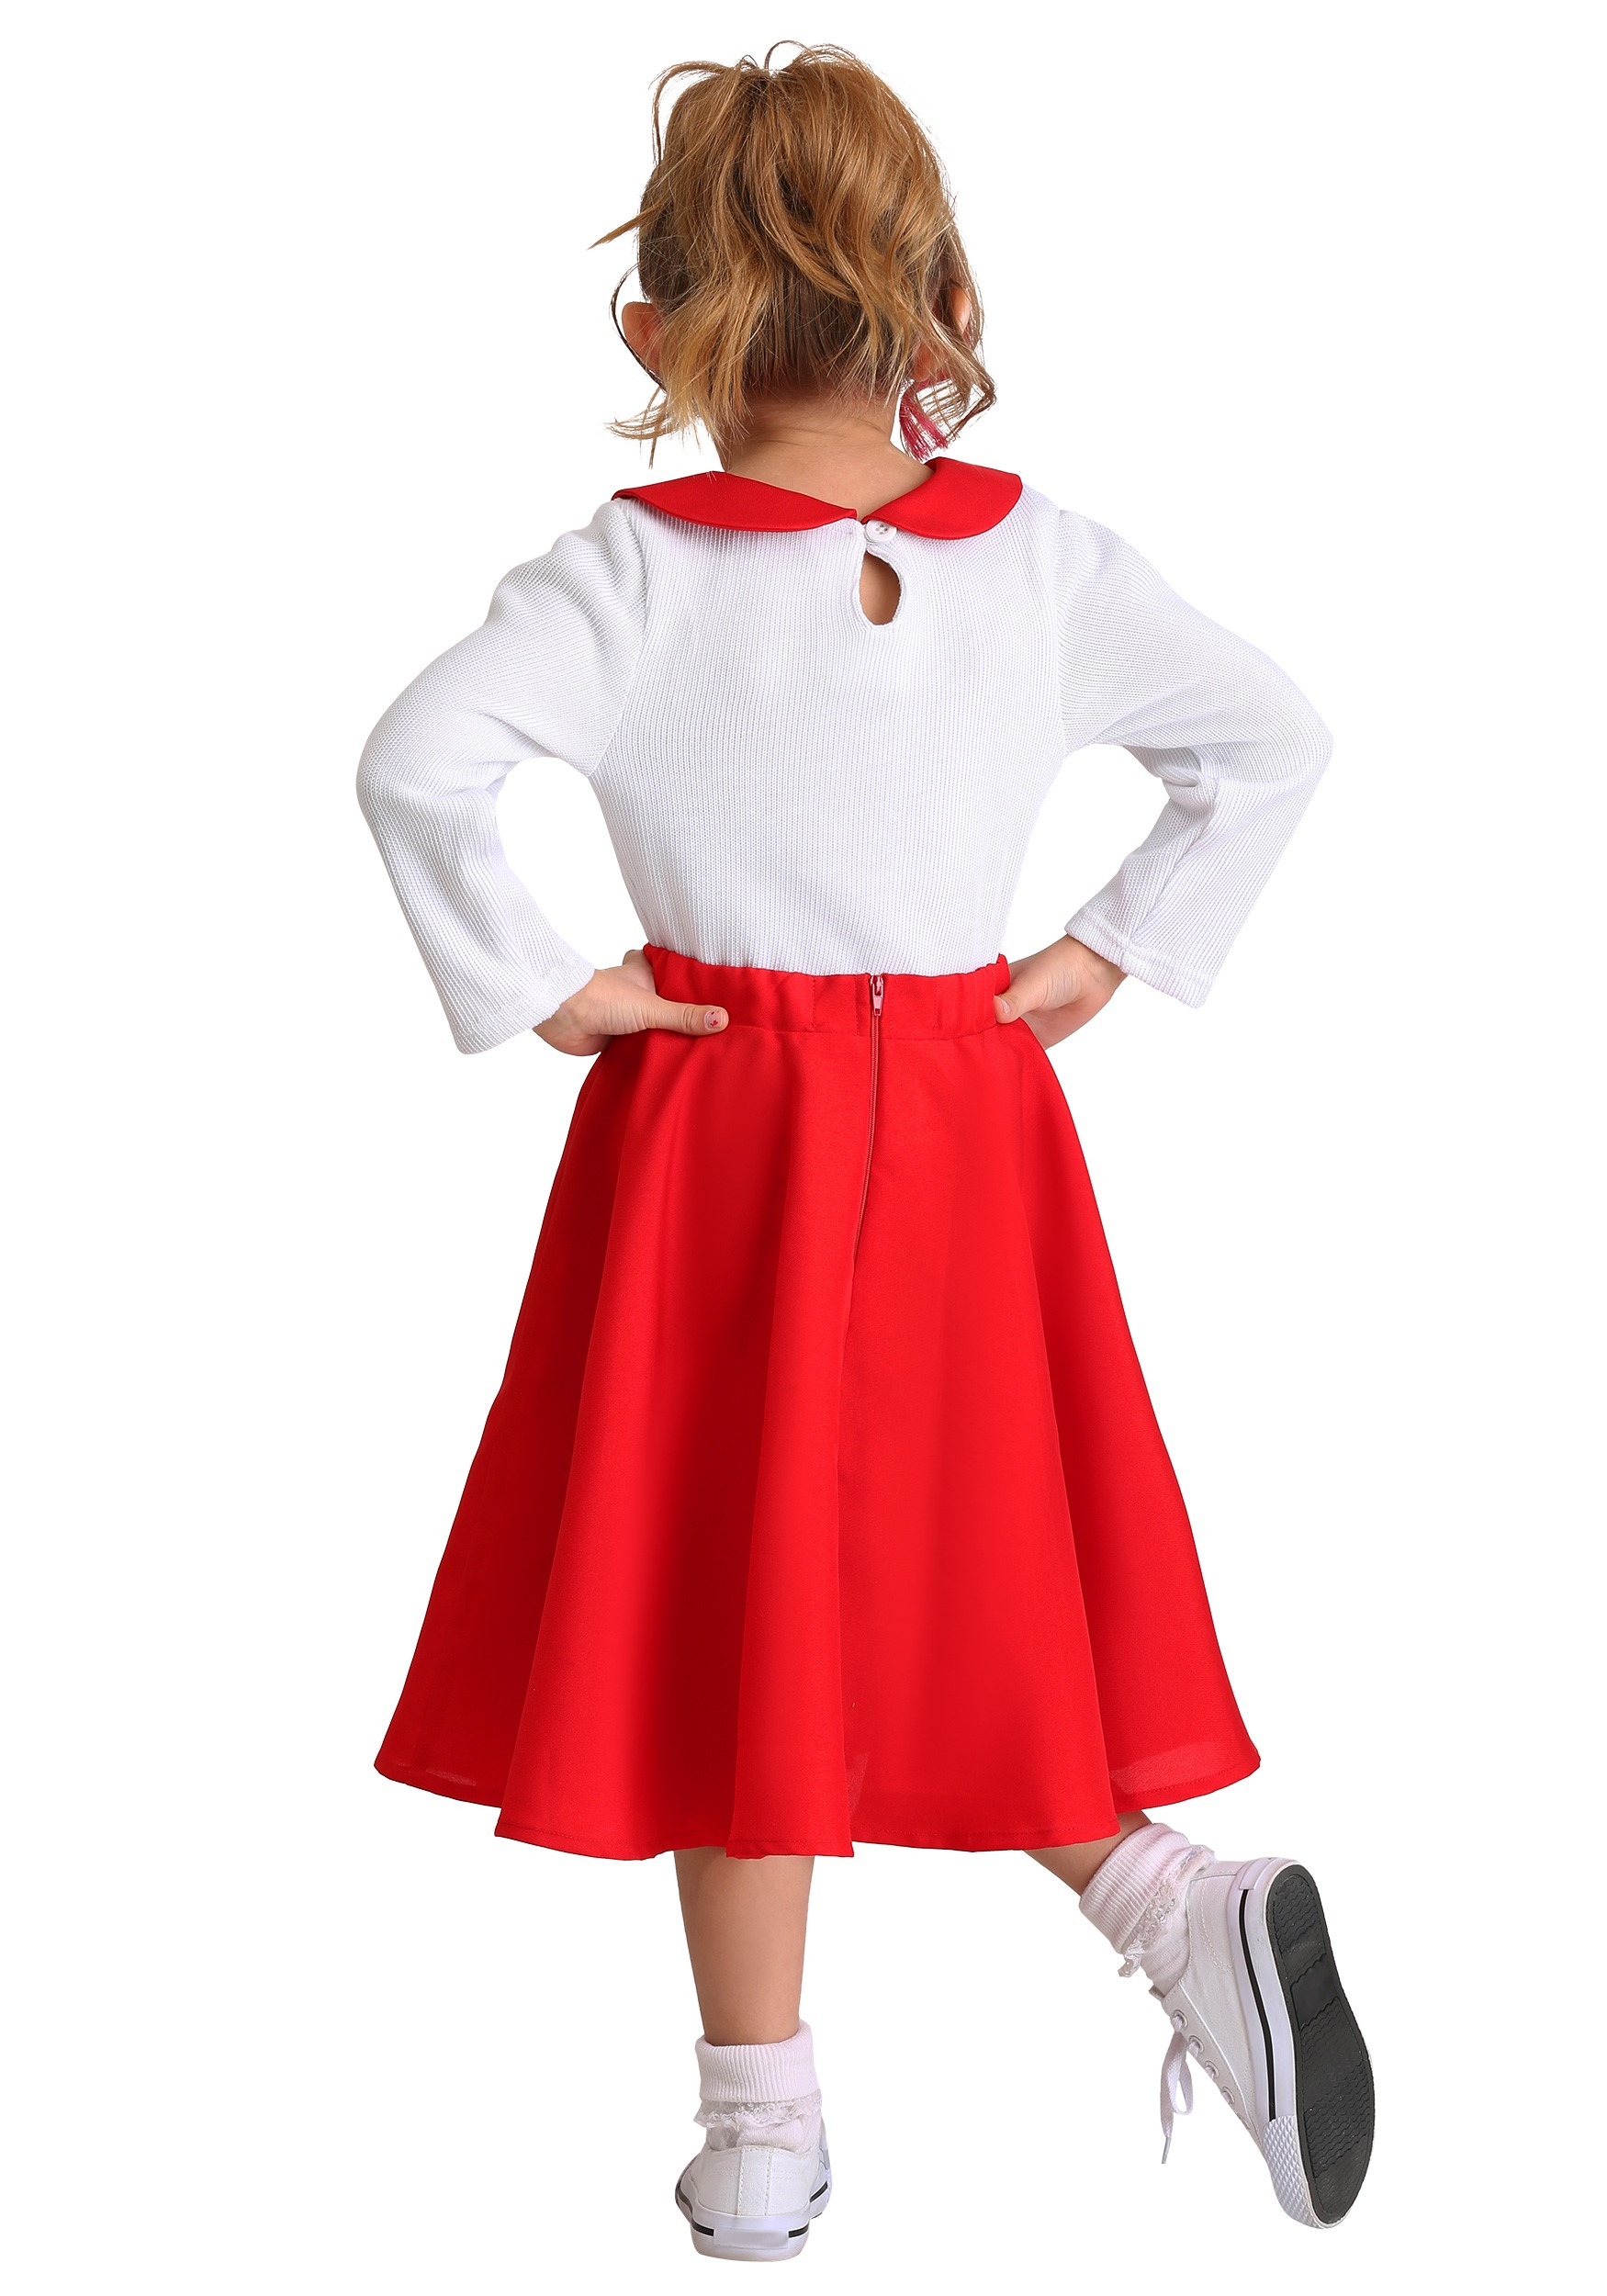 Grease Rydell High Toddler's Cheerleader Costume 